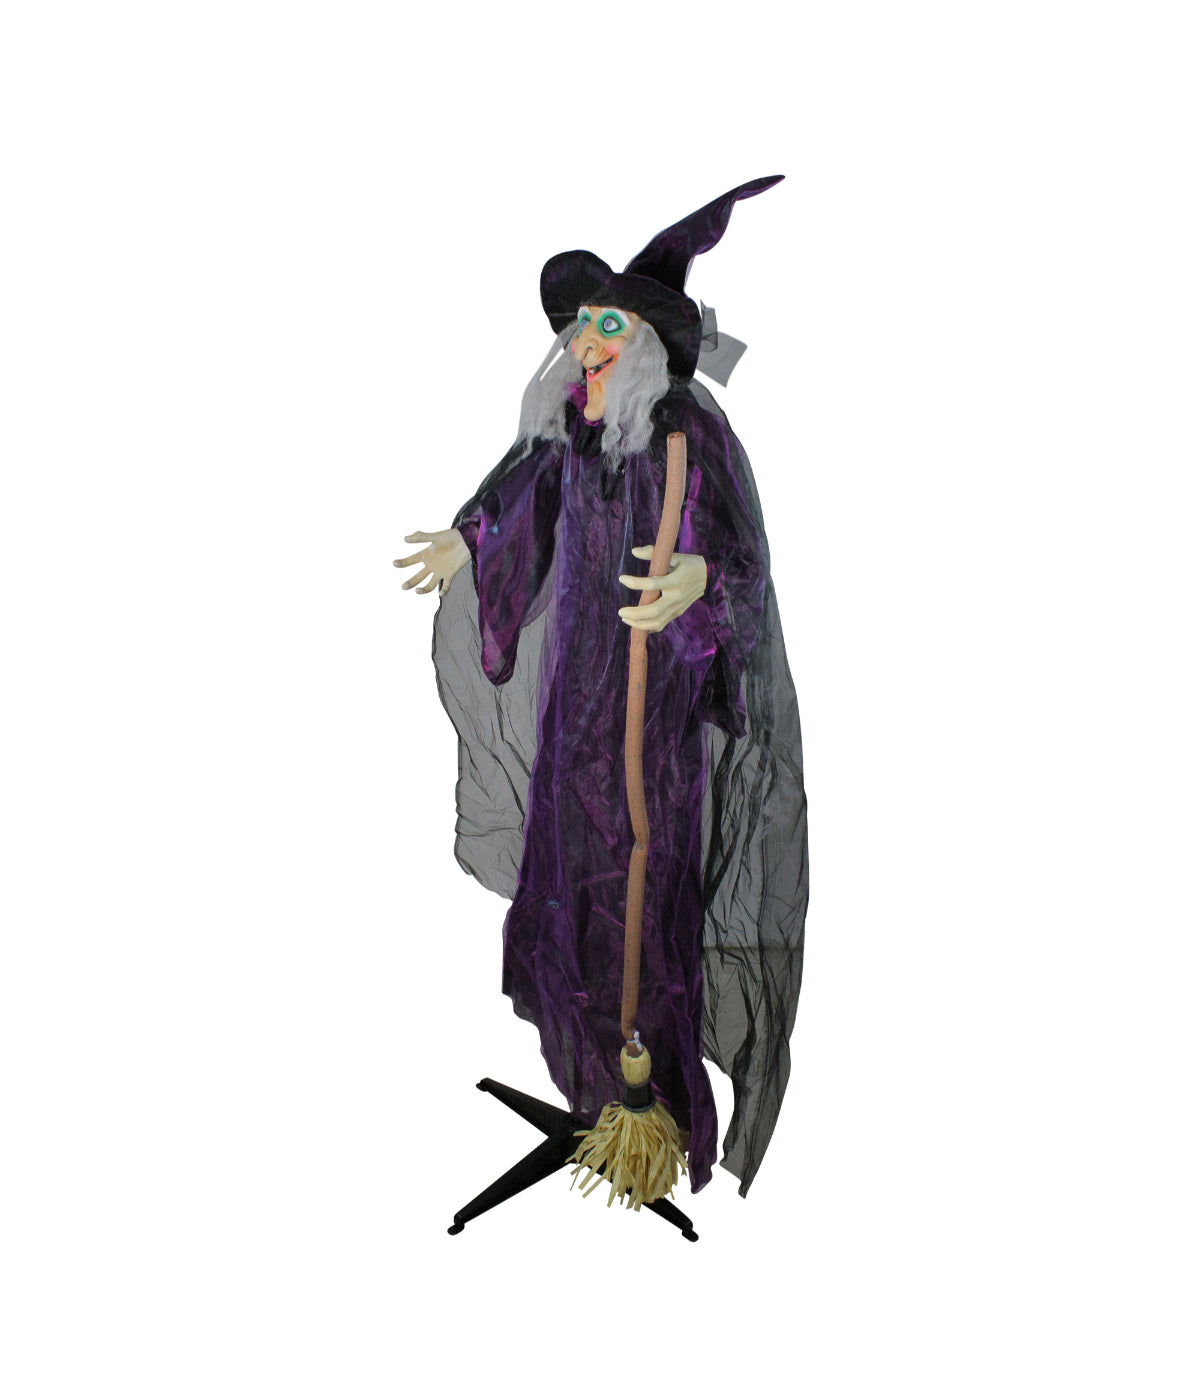 Standing Witch and Broomstick Animated Halloween Figure Decoration